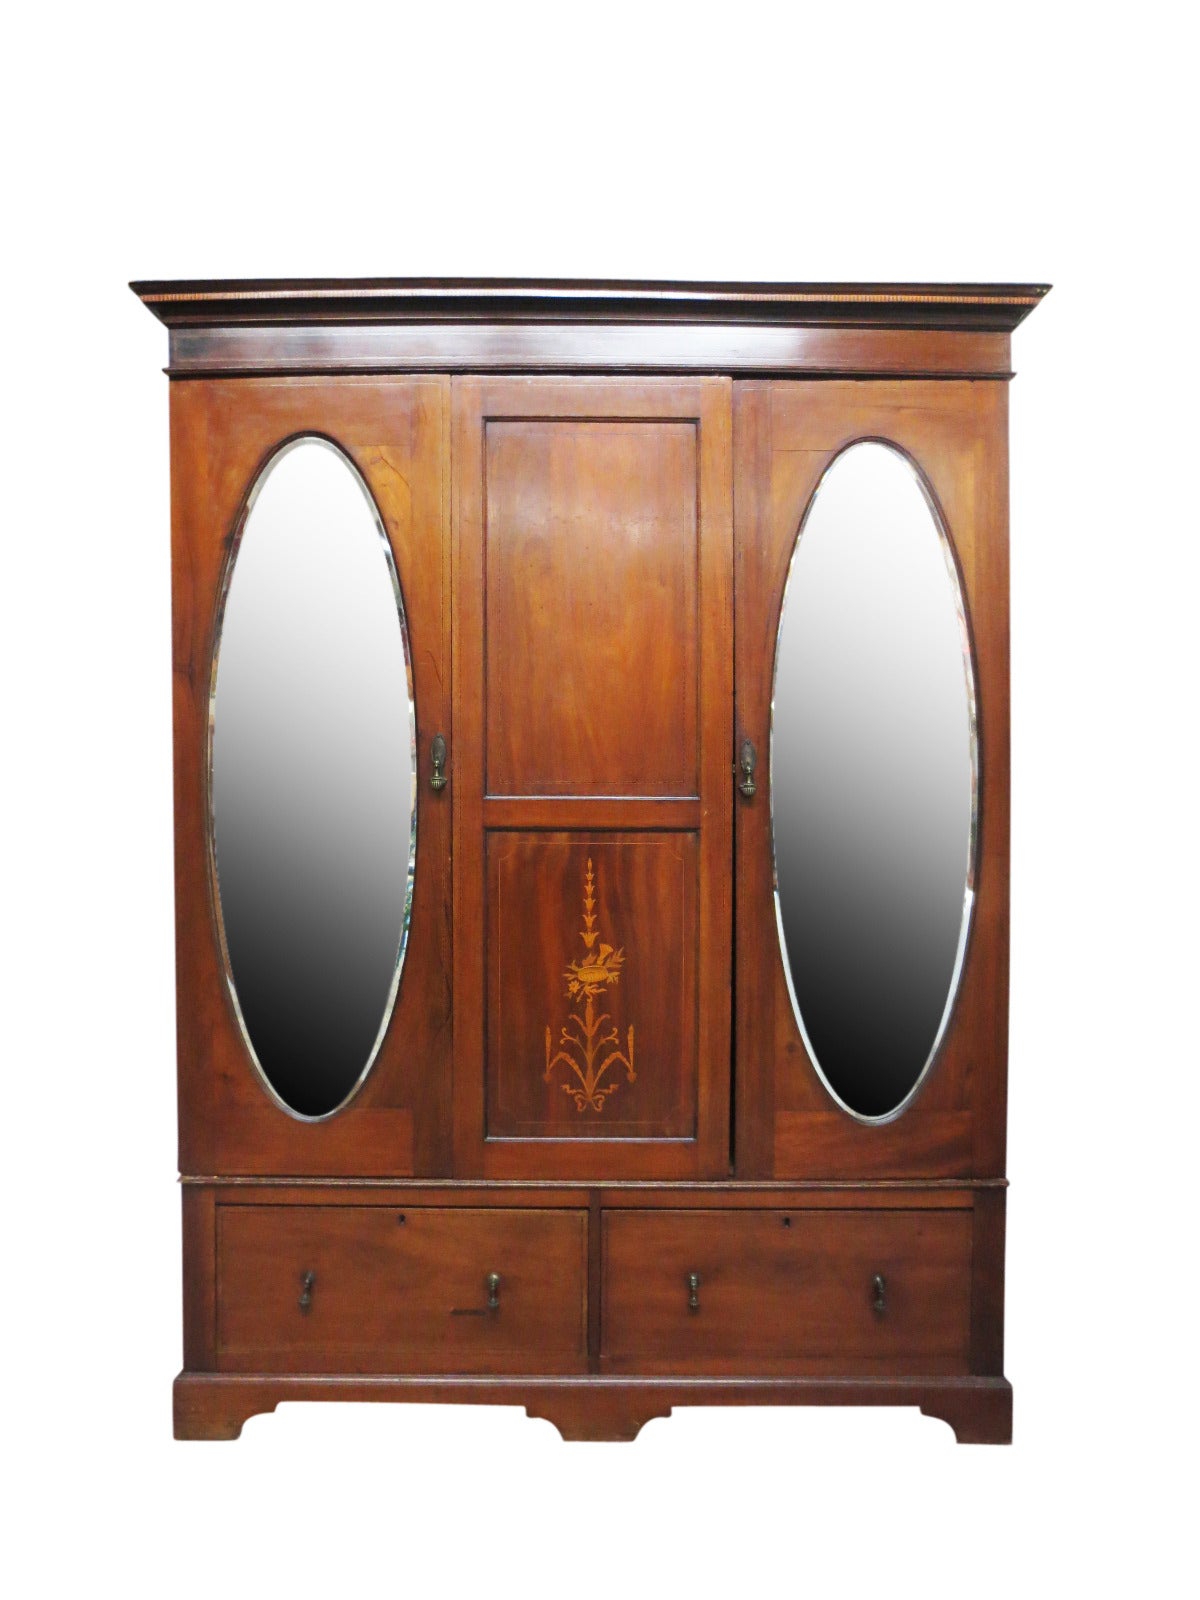 Collapsible armoire with two oval-mirrored doors. The armoire dismantles into four pieces for easy transport and assembly. Scratches at edges, scratches and dents on sides.